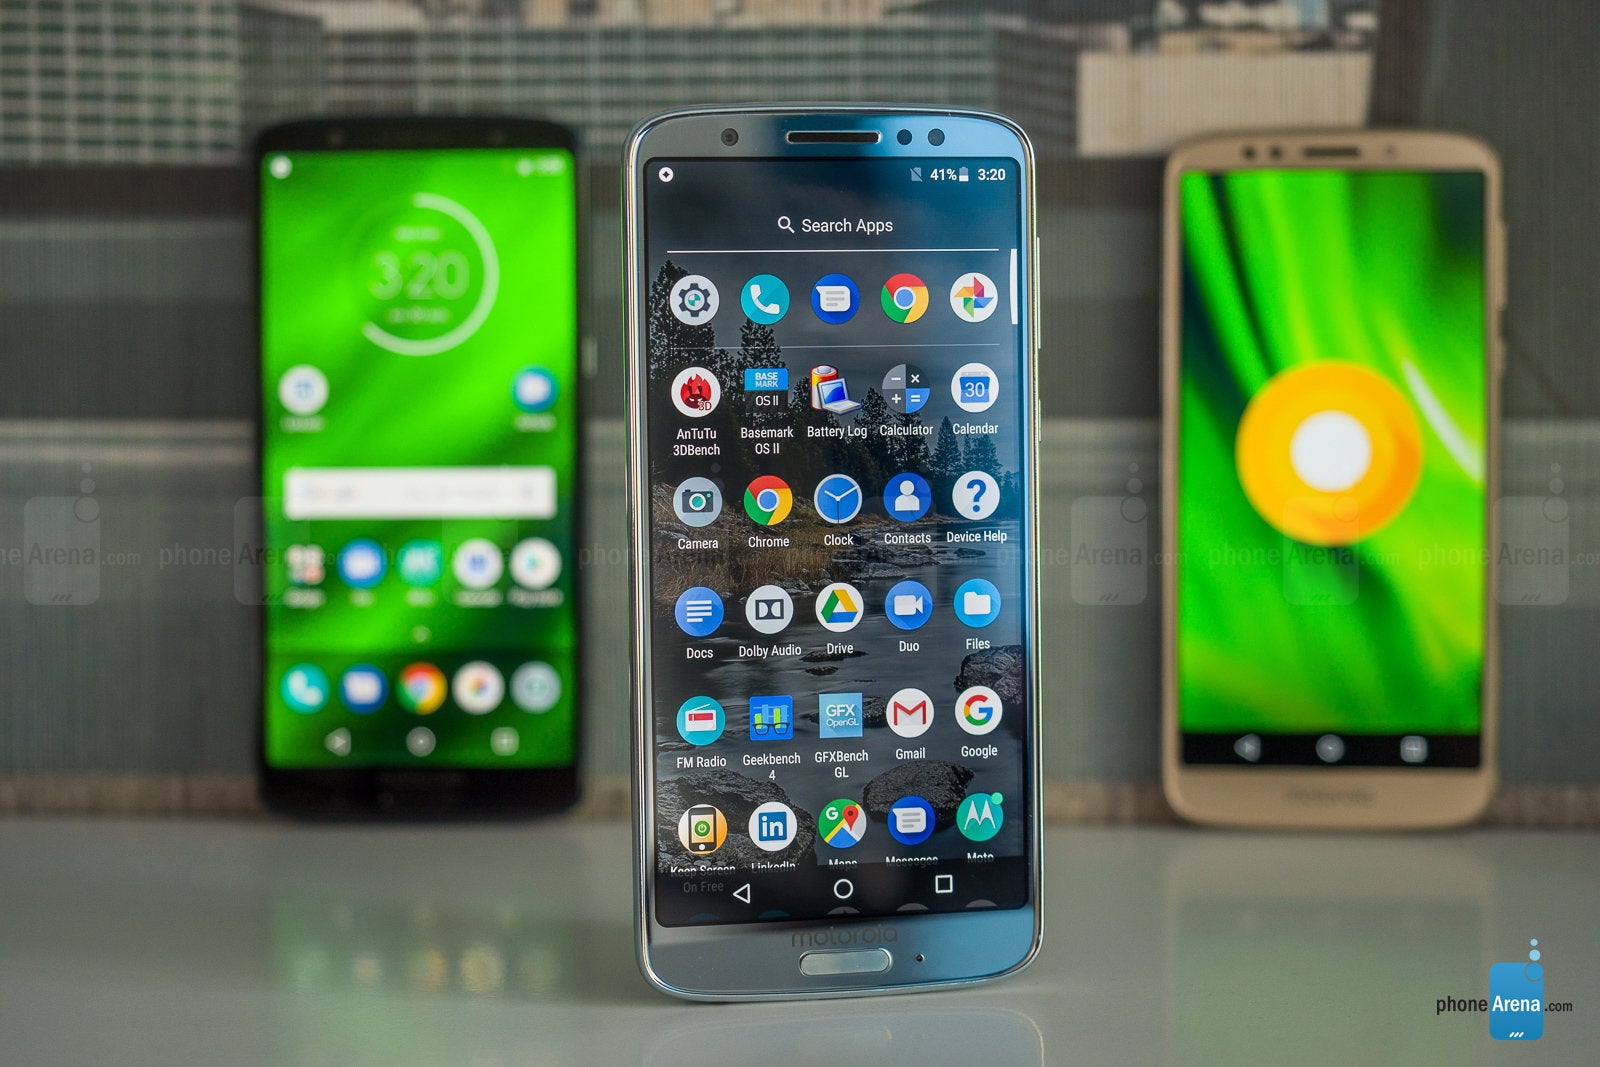 Left to right - G6 Plus, Moto G6, G6 Play - Motorola Moto G6, G6 Plus and G6 Play Review